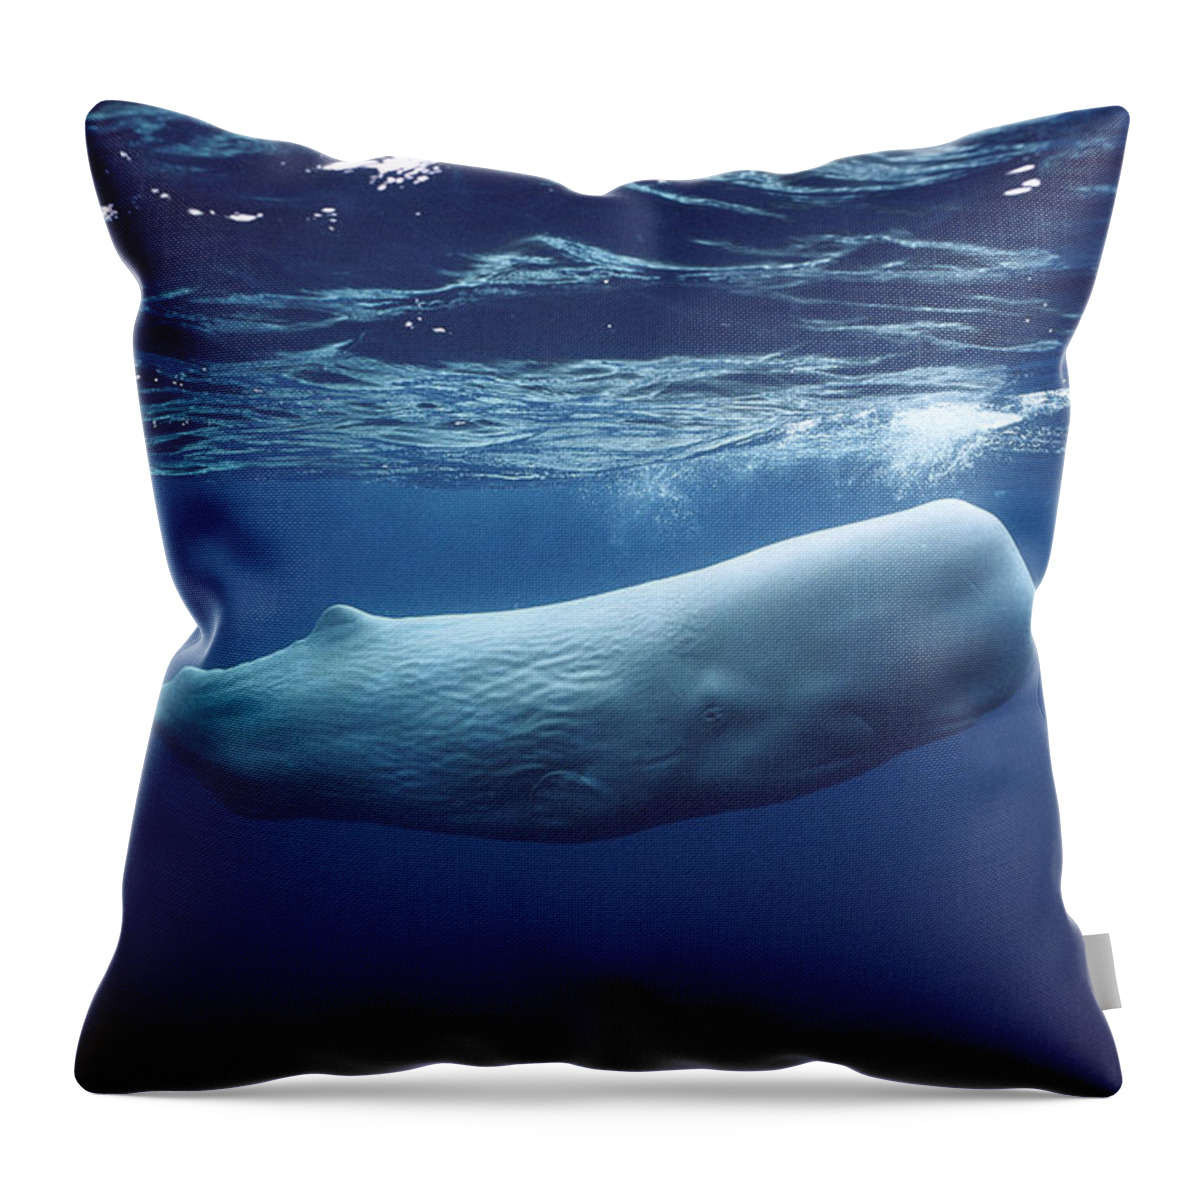 00270022 Throw Pillow featuring the photograph White Sperm Whale by Hiroya Minakuchi